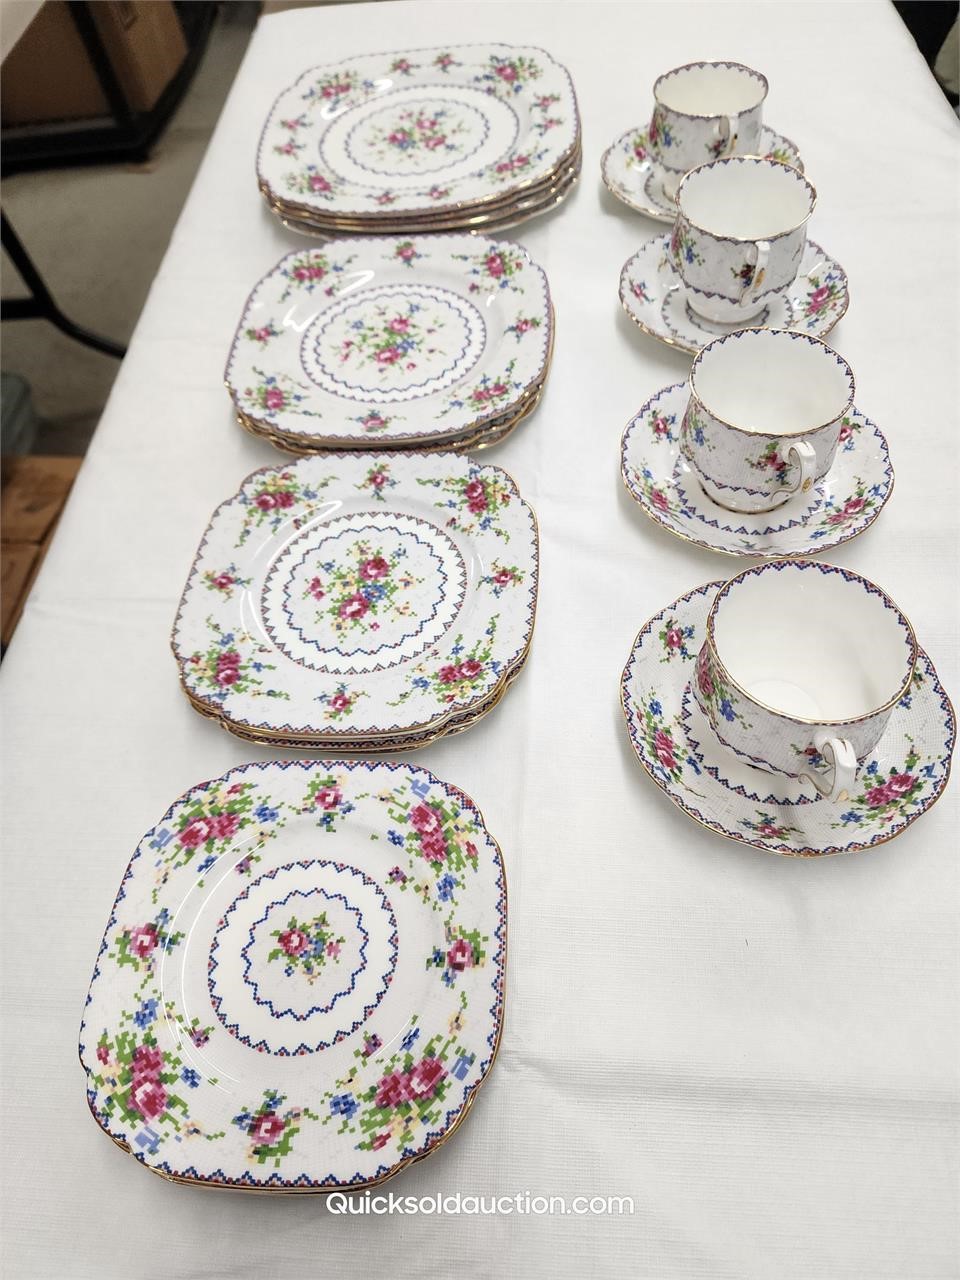 R.A. Petit Point 4 Place Settings Consisting Of 24